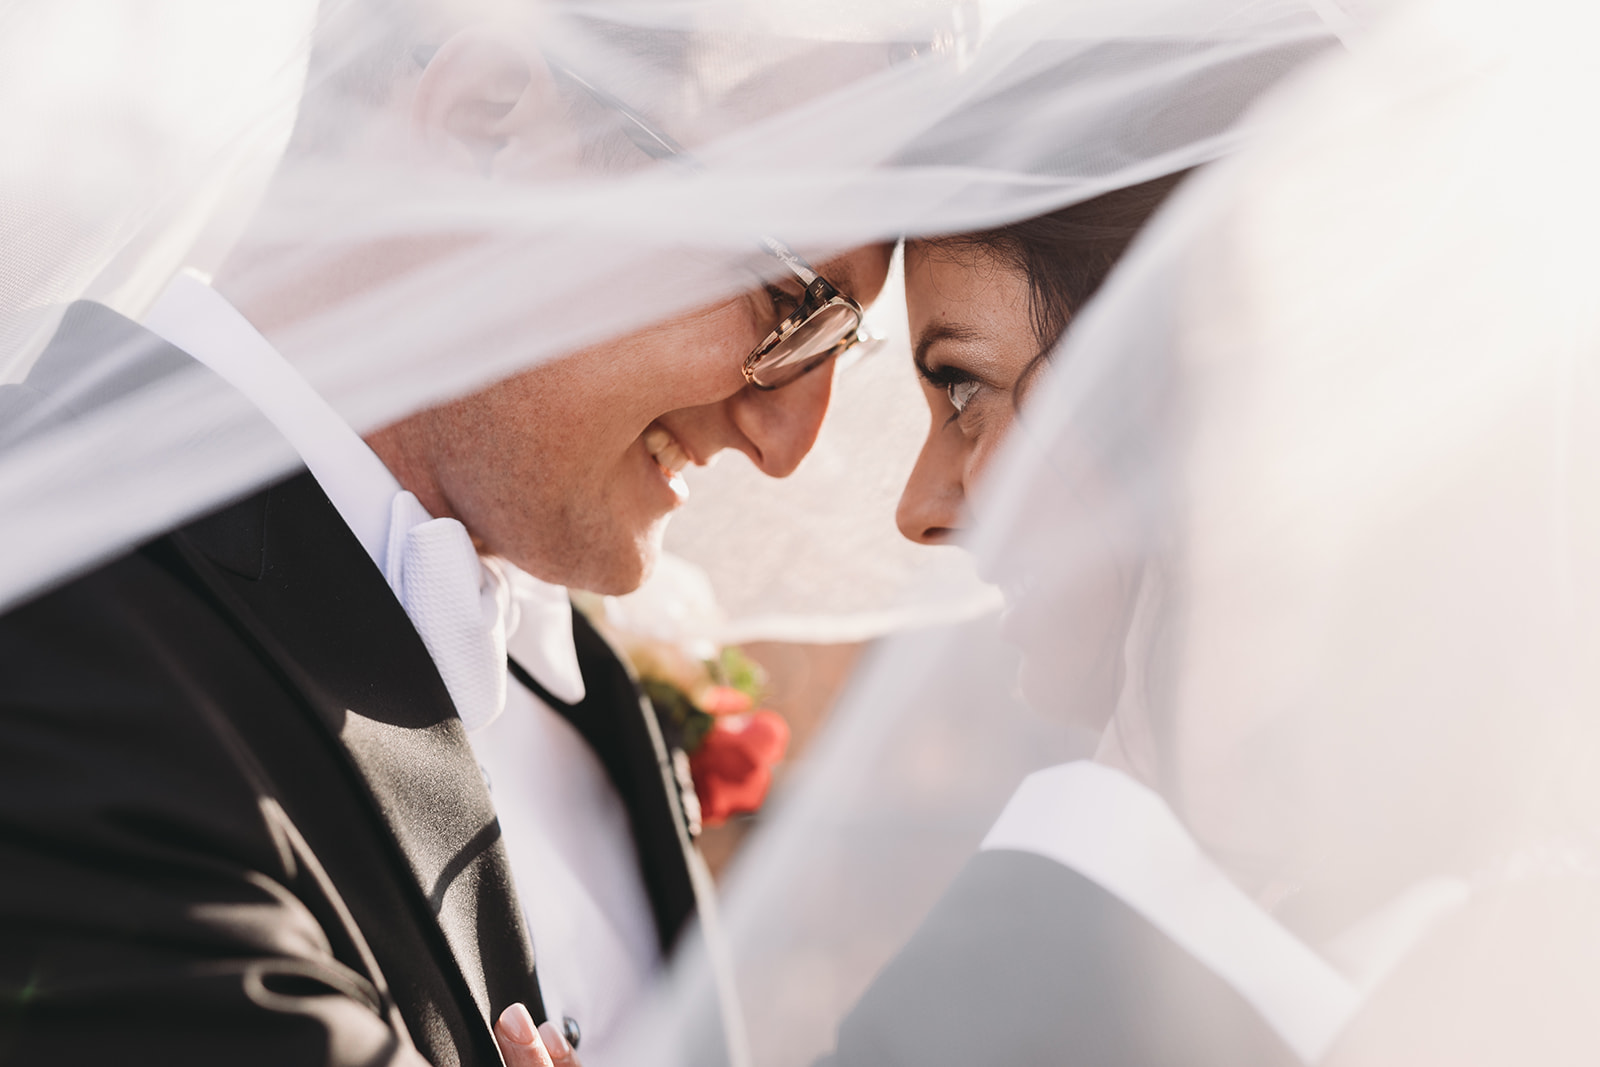 man with glasses looks at bride under veil in this best eyeglasses wedding day photo